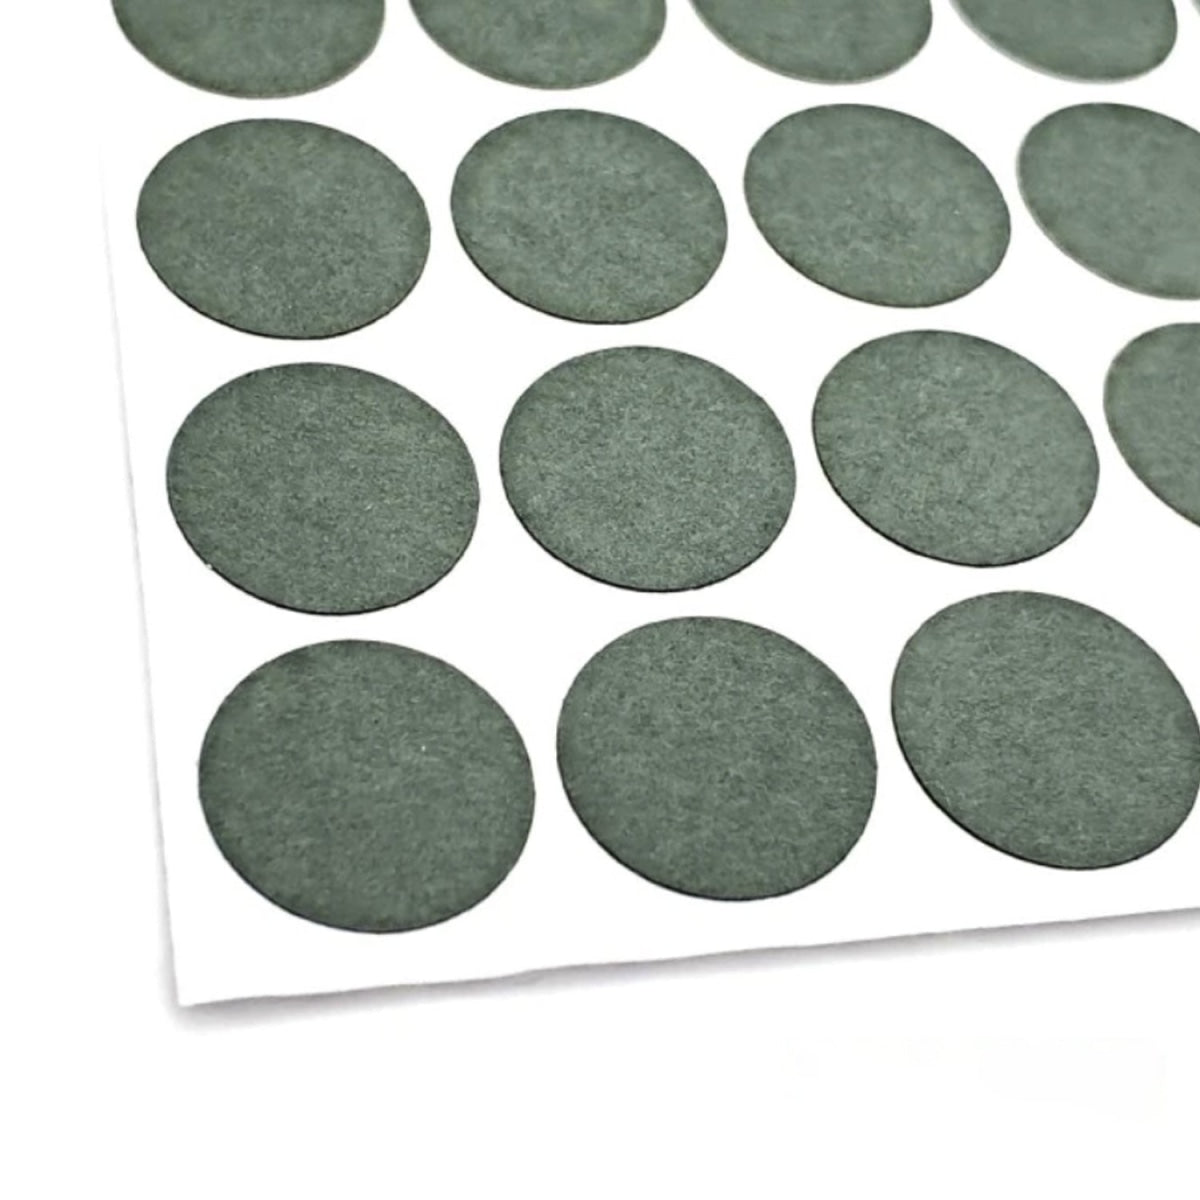 0.2m/18/20pcs 18650 Circles 1S Barley Paper Li-ion Battery Insulation Gasket for Battery Pack Pad - 18 solid circles - - Asia Sell